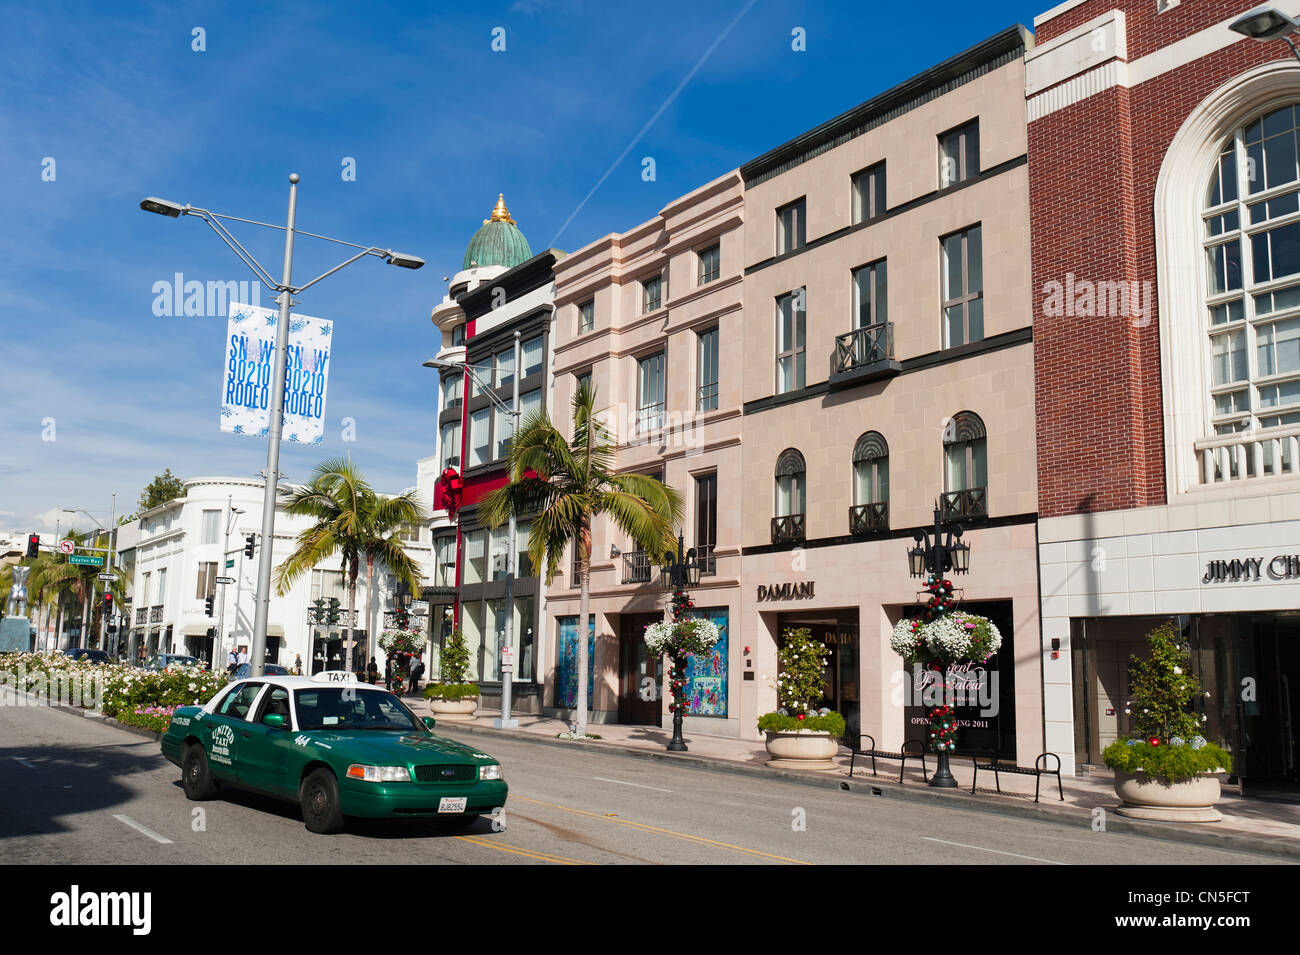 Luxury shops on Rodeo Drive, Beverly Hills Stock Photo - Alamy